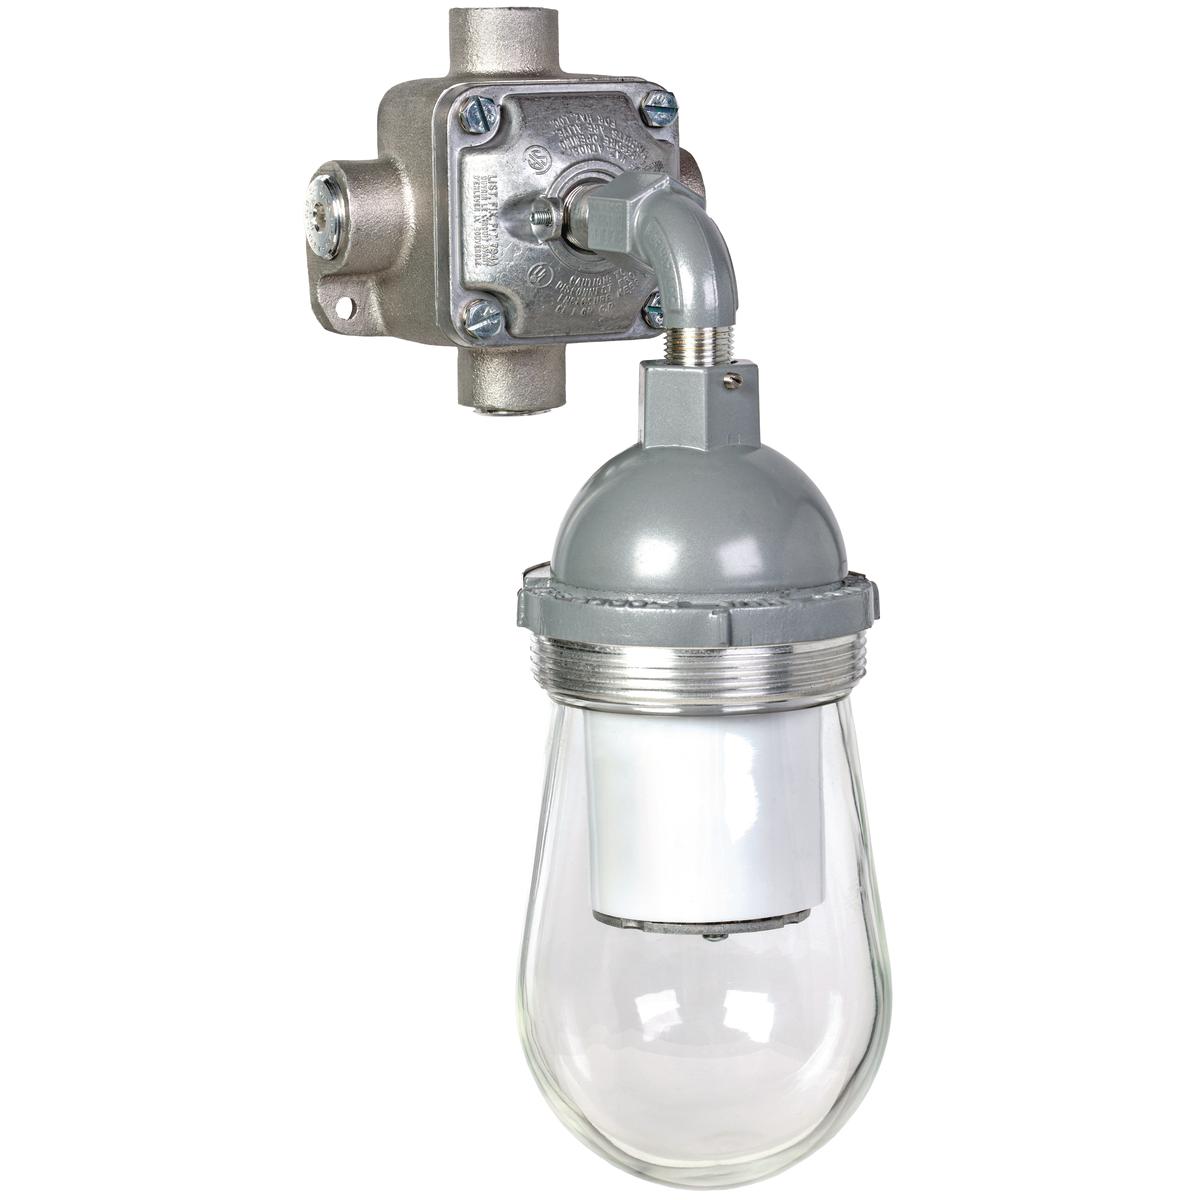 Hubbell DVL1330B2G The DVL Series is a Dust Tight/ Utility fixture using energy efficient LED's. This fixture is made with a cast copper-free aluminum housing and mount that is  suitable for harsh and hazardous environments. With the design of this fixtures internal heat si